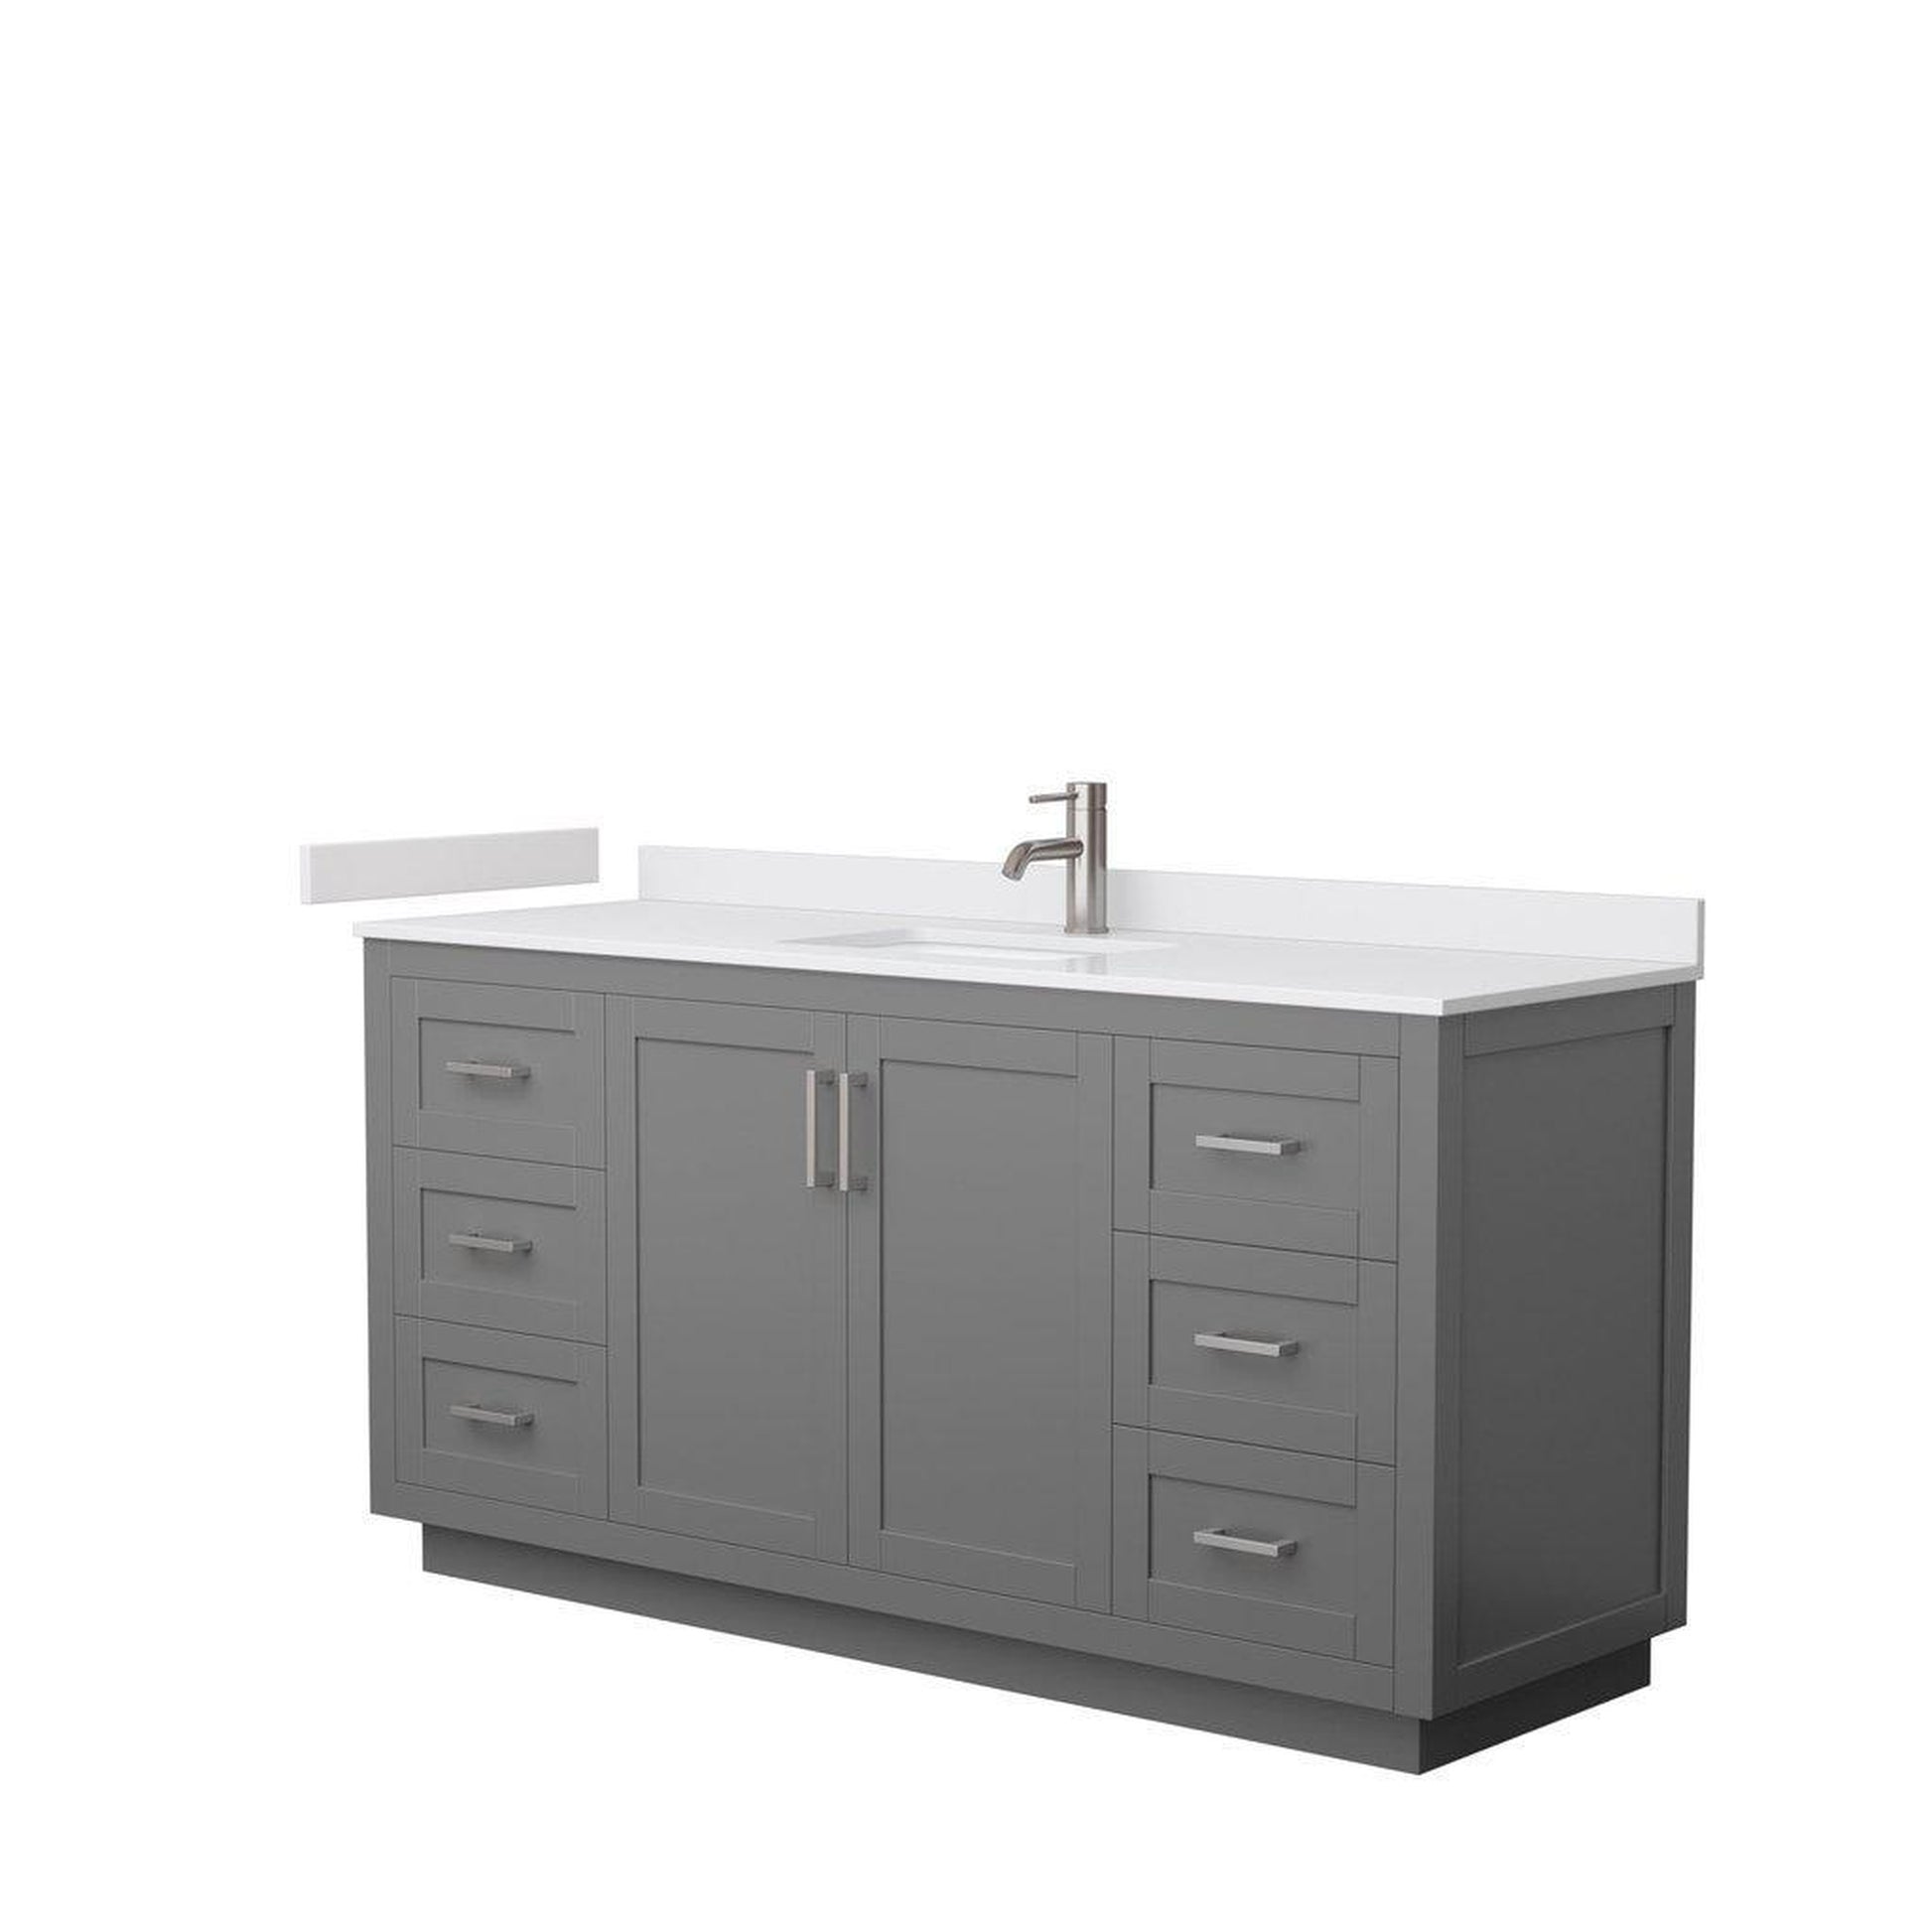 Wyndham Collection Miranda 66" Single Bathroom Dark Gray Vanity Set With White Cultured Marble Countertop, Undermount Square Sink, And Brushed Nickel Trim